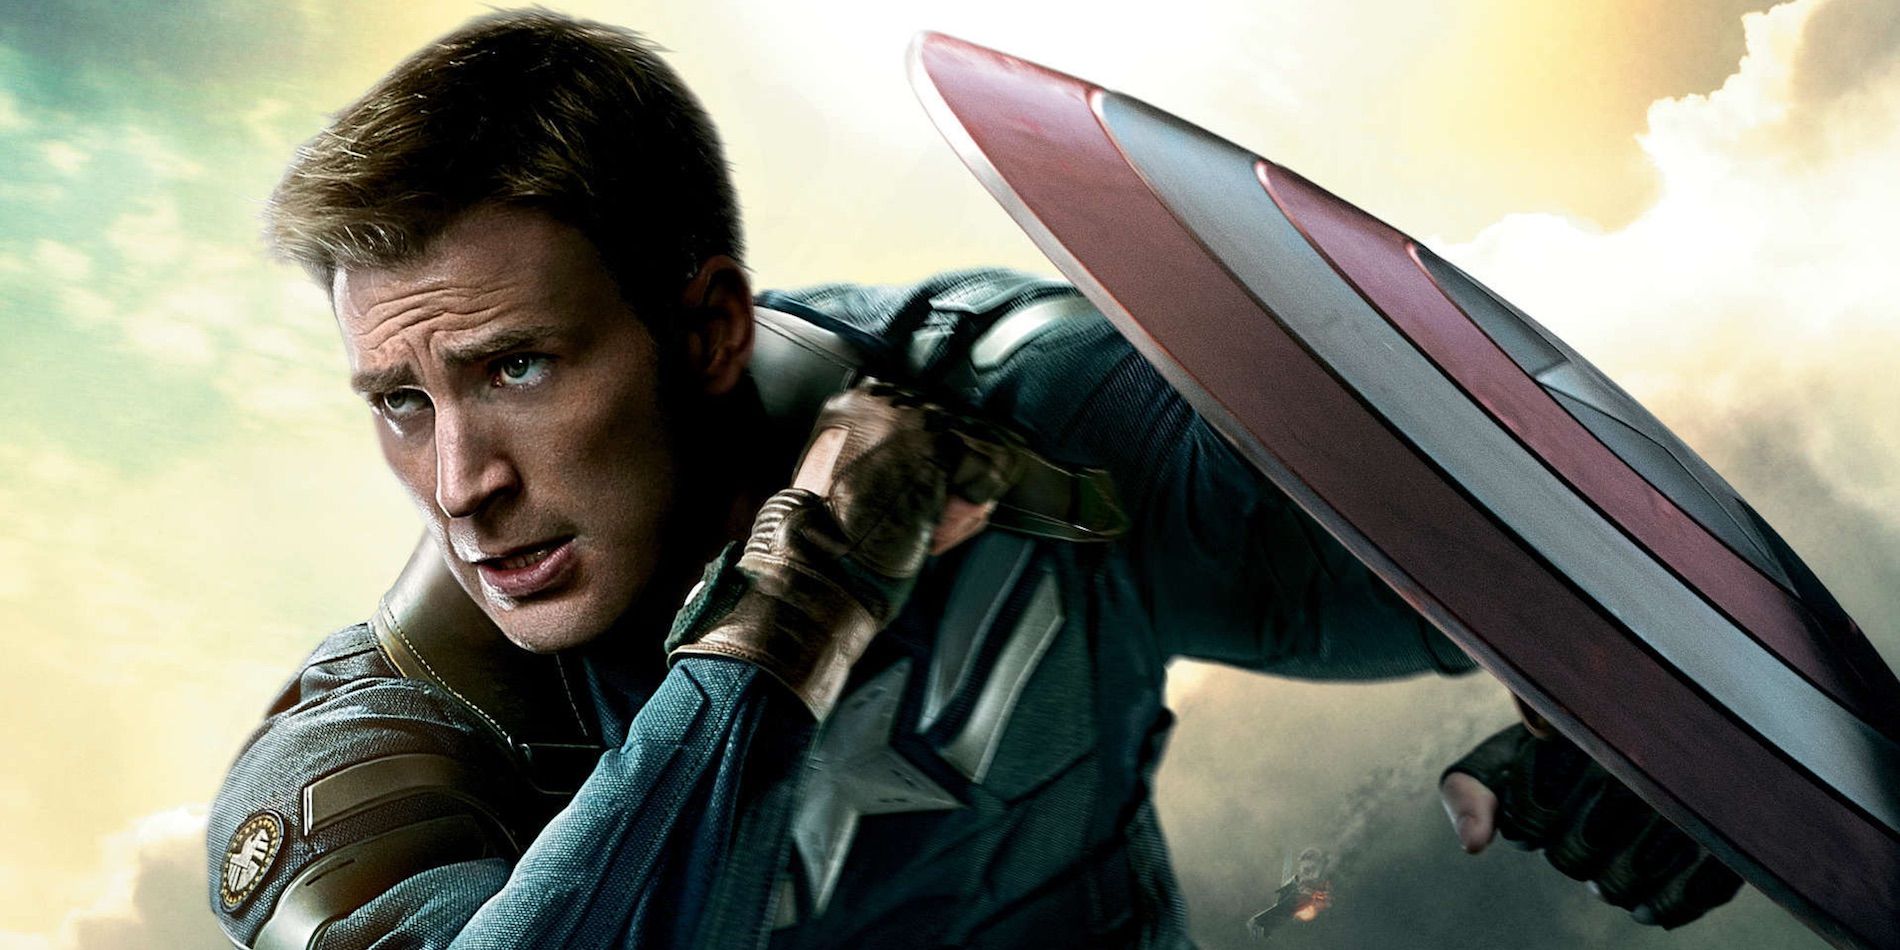 Steve Rogers holding the Captain America shield on his arm in Captain America: The Winter Soldier